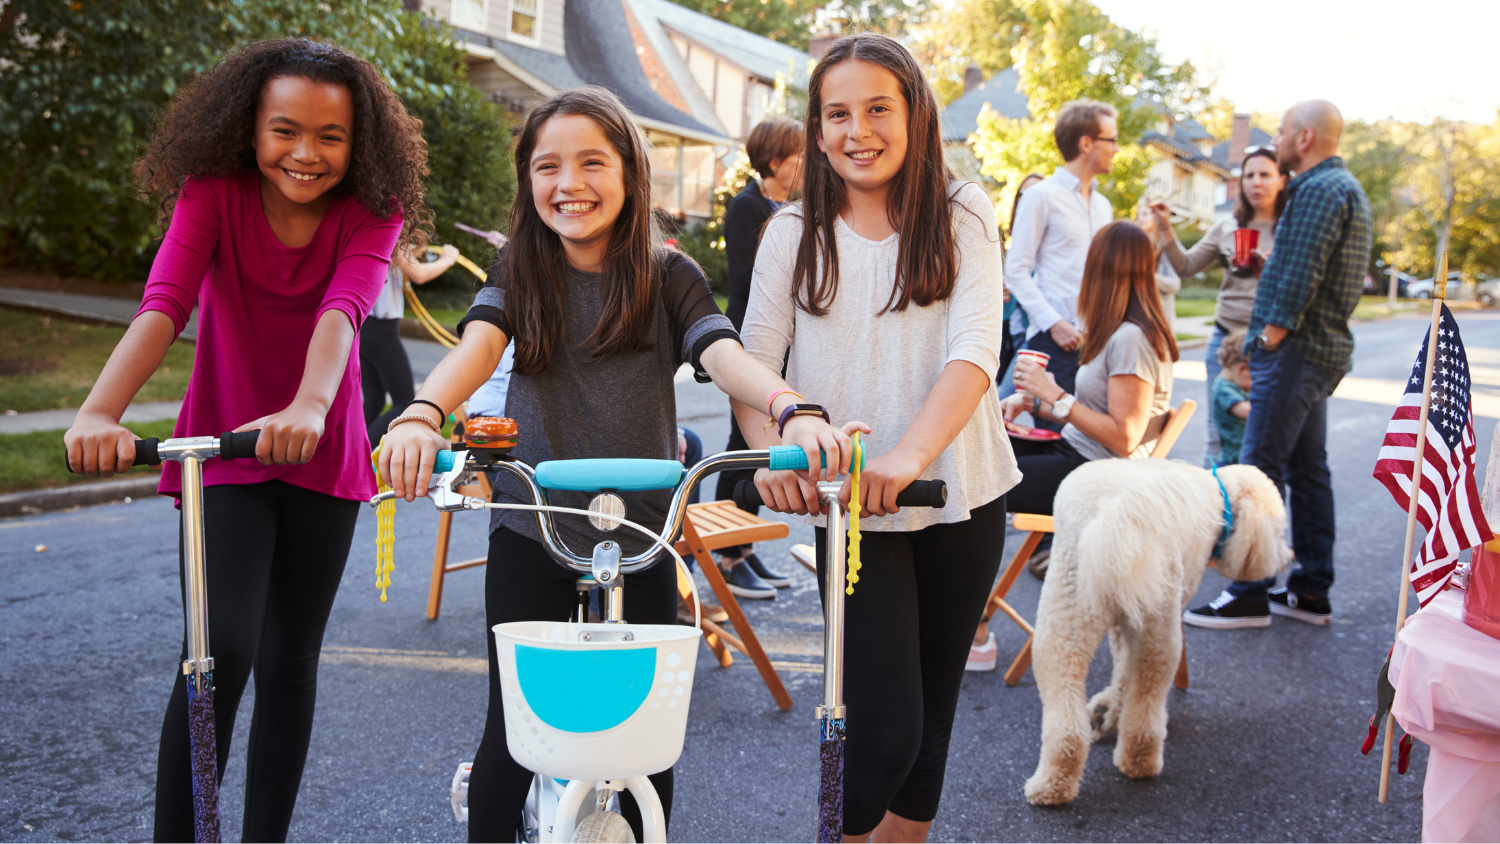 Three young girls on bikes and scooters smile for a photo while adults talk in a group in the background.